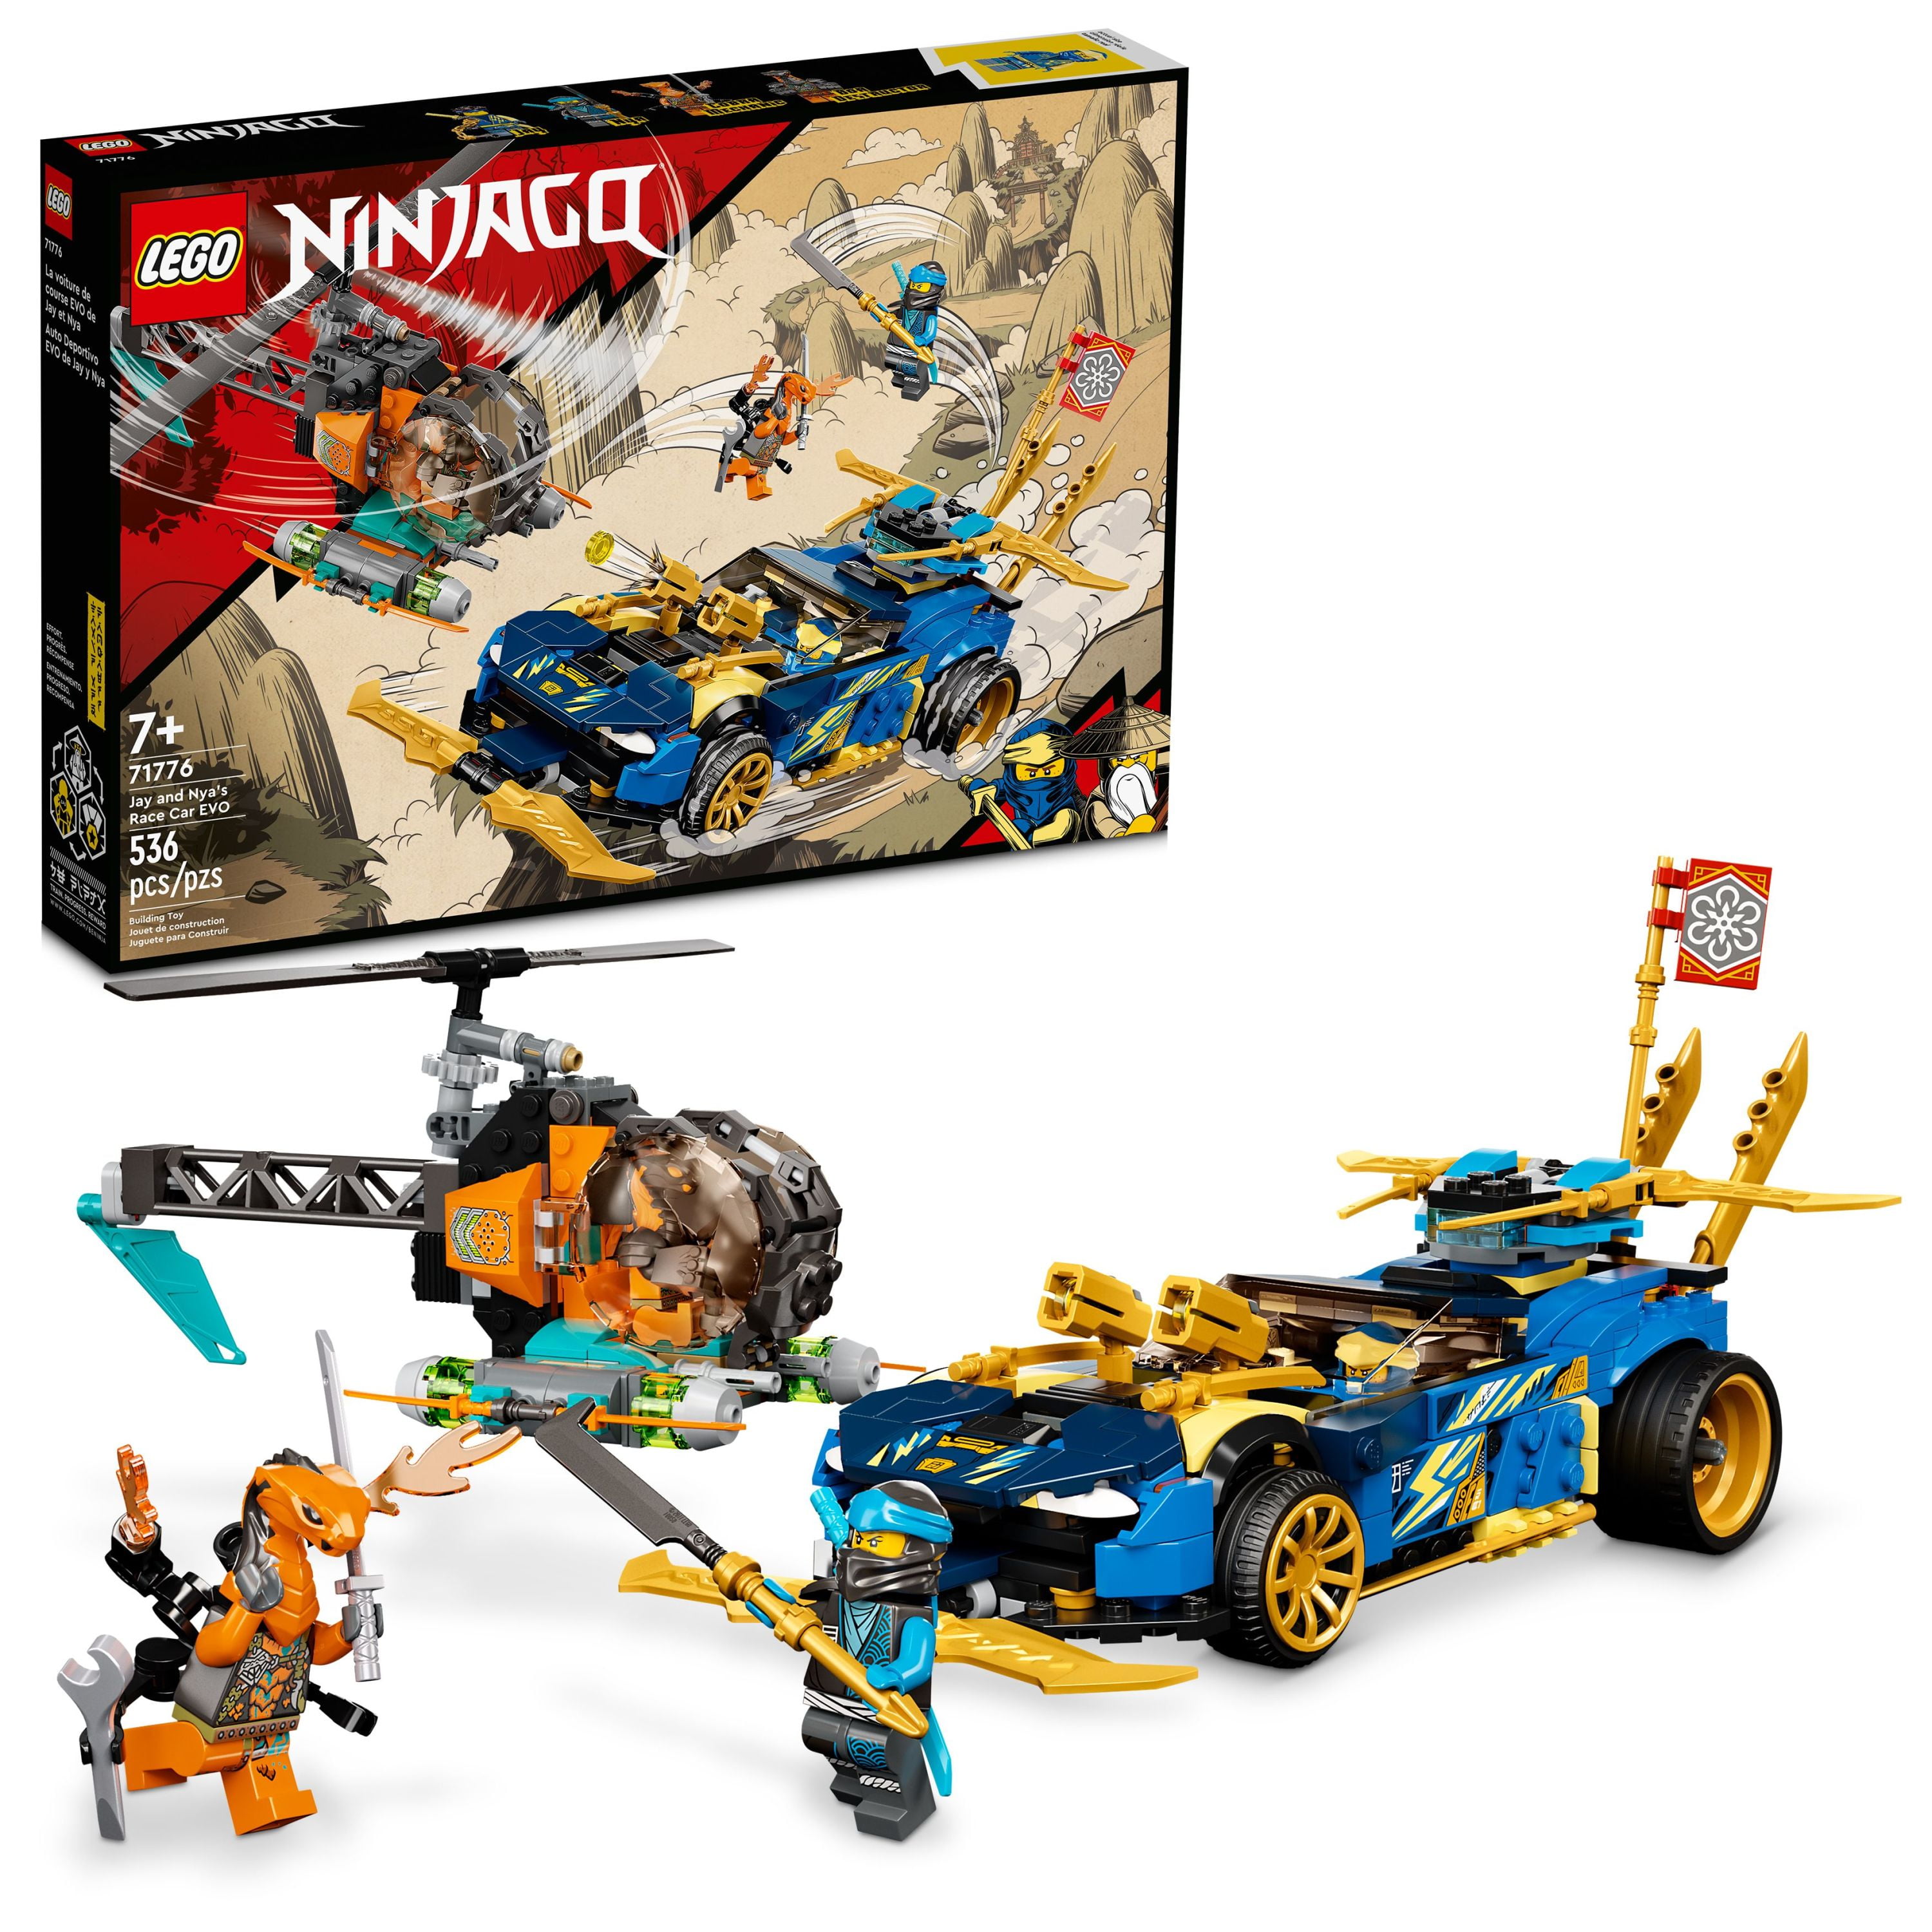 LEGO NINJAGO Jay and Nya's Race Car EVO Set 71776 with Toy Helicopter and  Boa Snake Figure for Kids Ages 7+, Collectible Mission Banner Sets -  